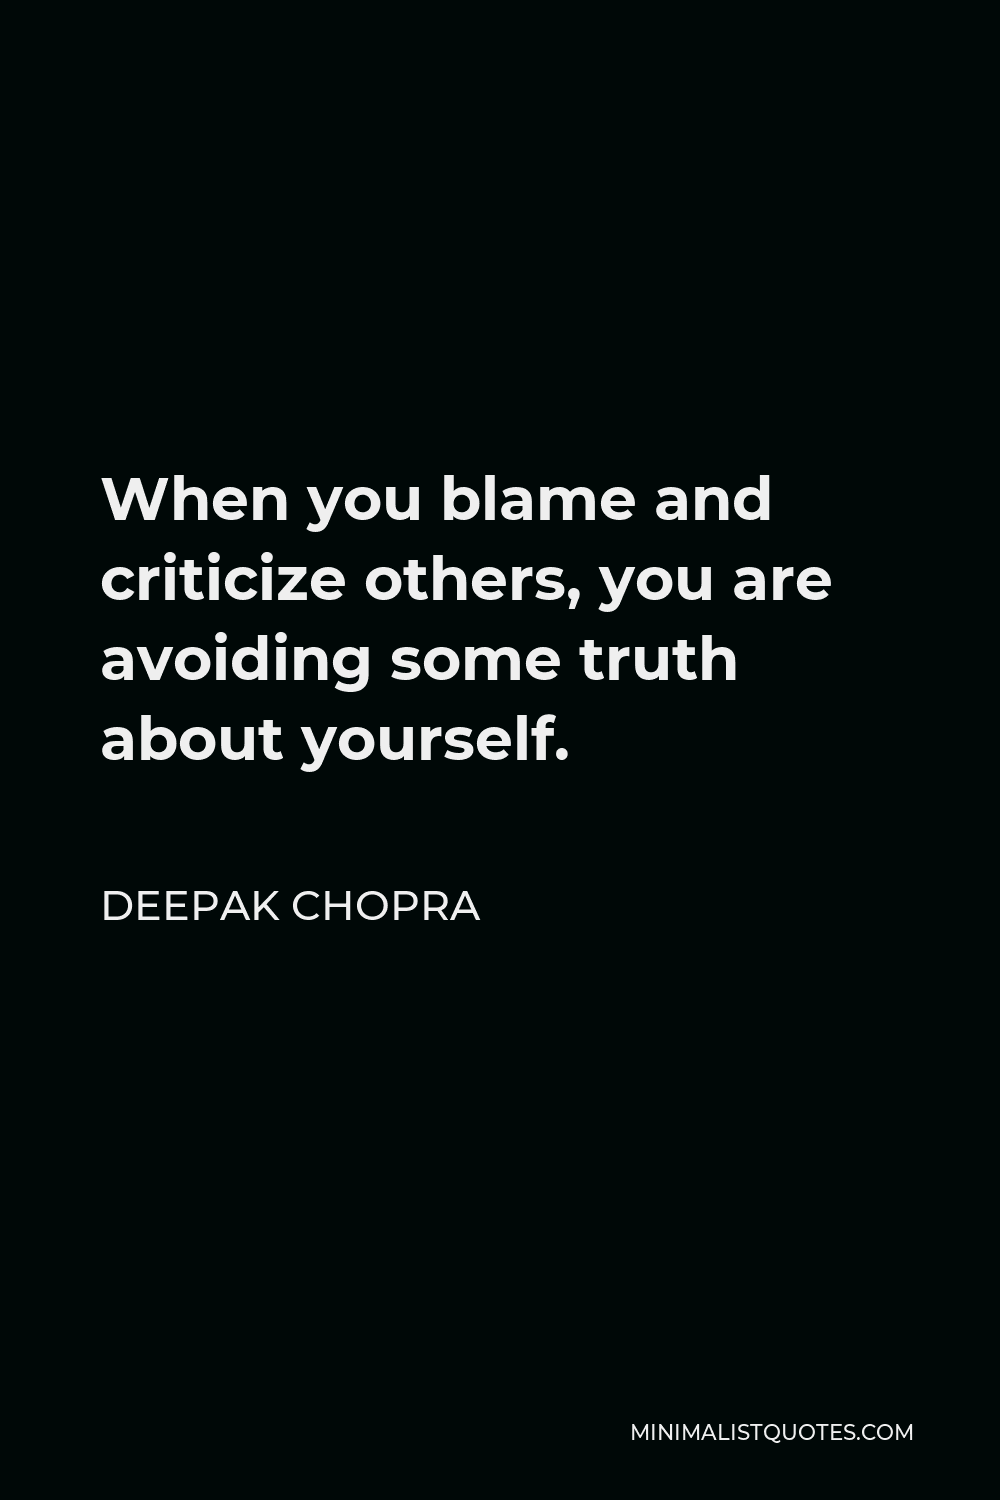 Deepak Chopra Quote - When you blame and criticize others, you are avoiding some truth about yourself.